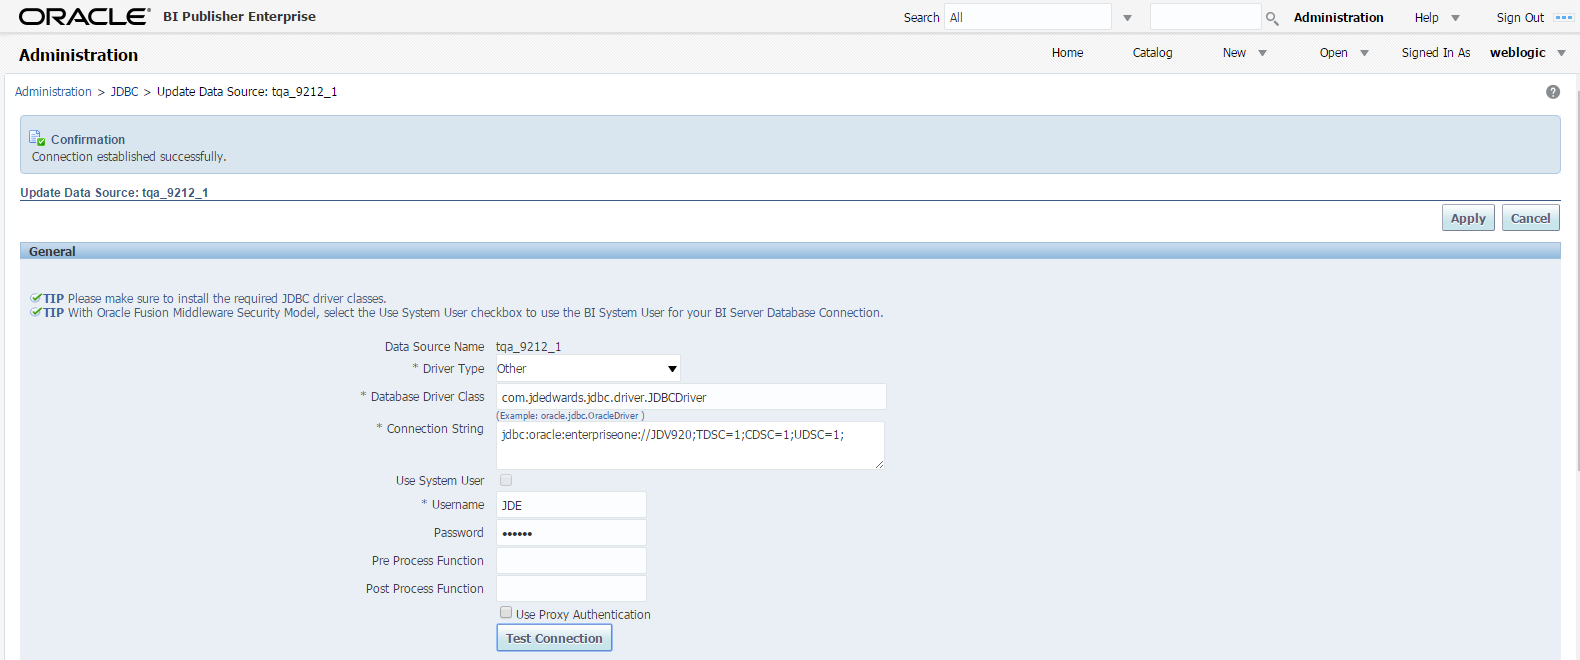 Adding the JDBC Driver as an Oracle BI Publisher data source.